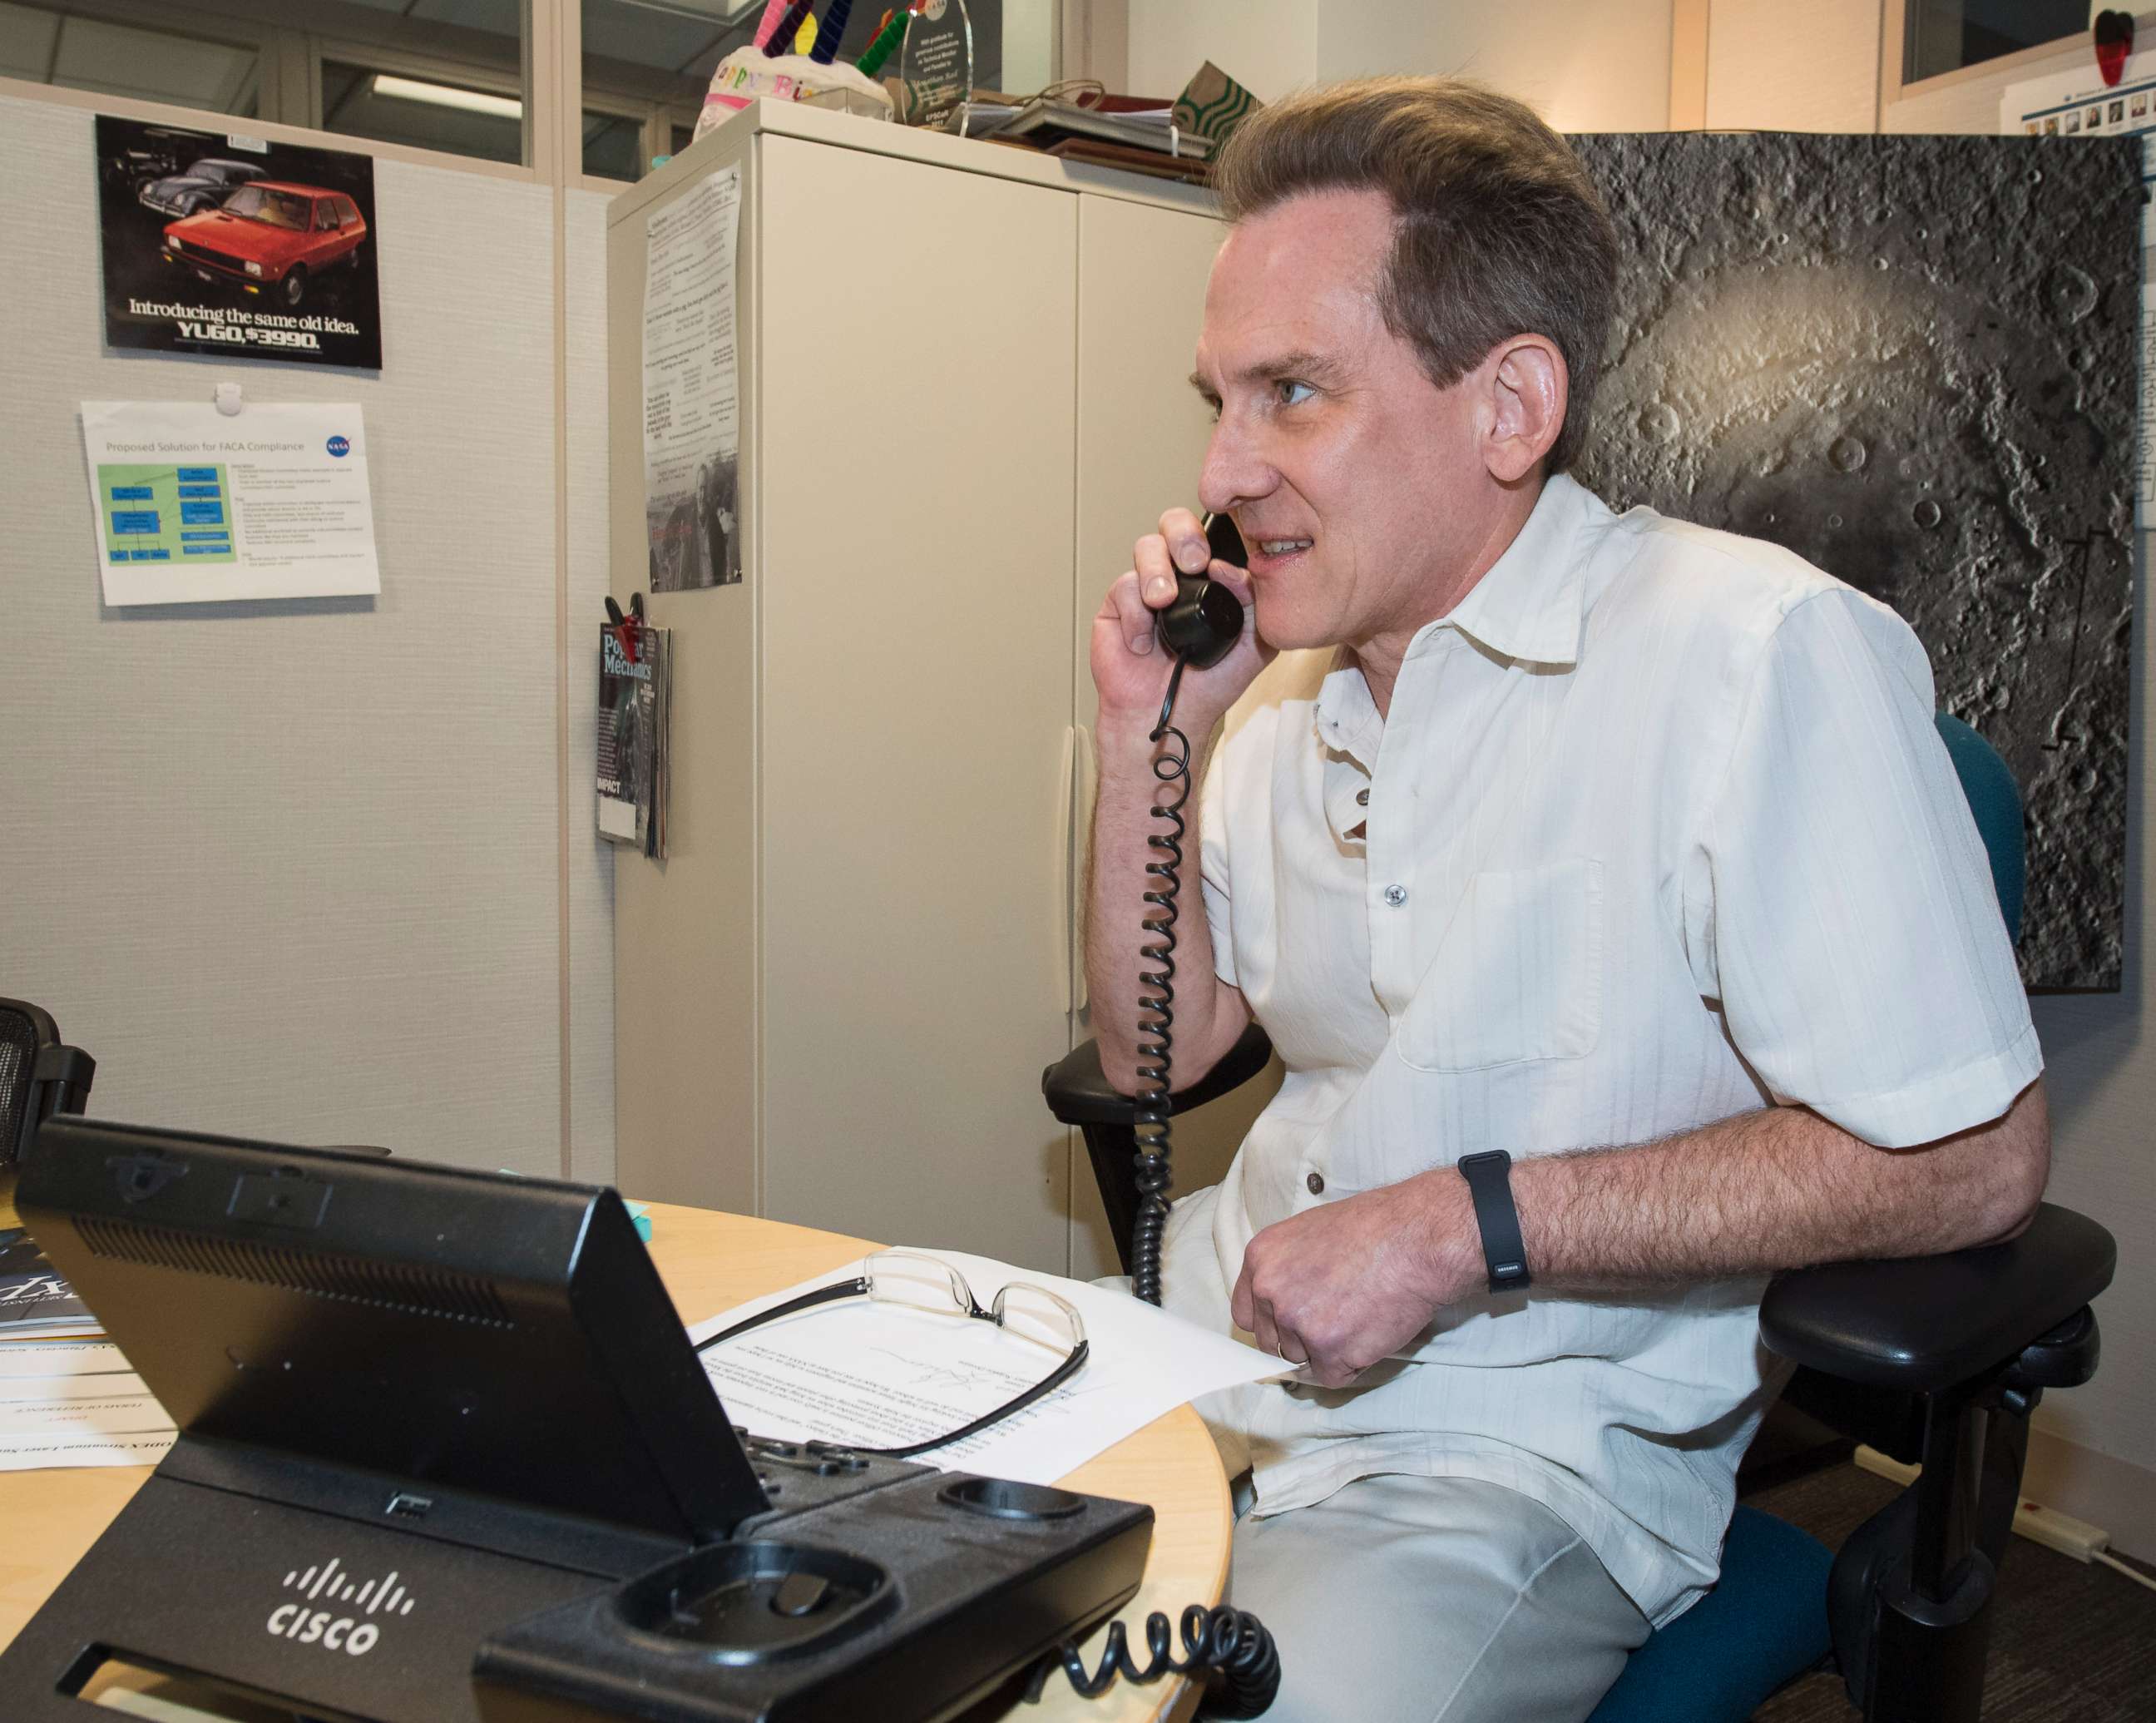 PHOTO: NASA’s Planetary Research Director, Jonathan Rall, called 9-year-old Jack Davis Friday to congratulate him on his interest in working for NASA.